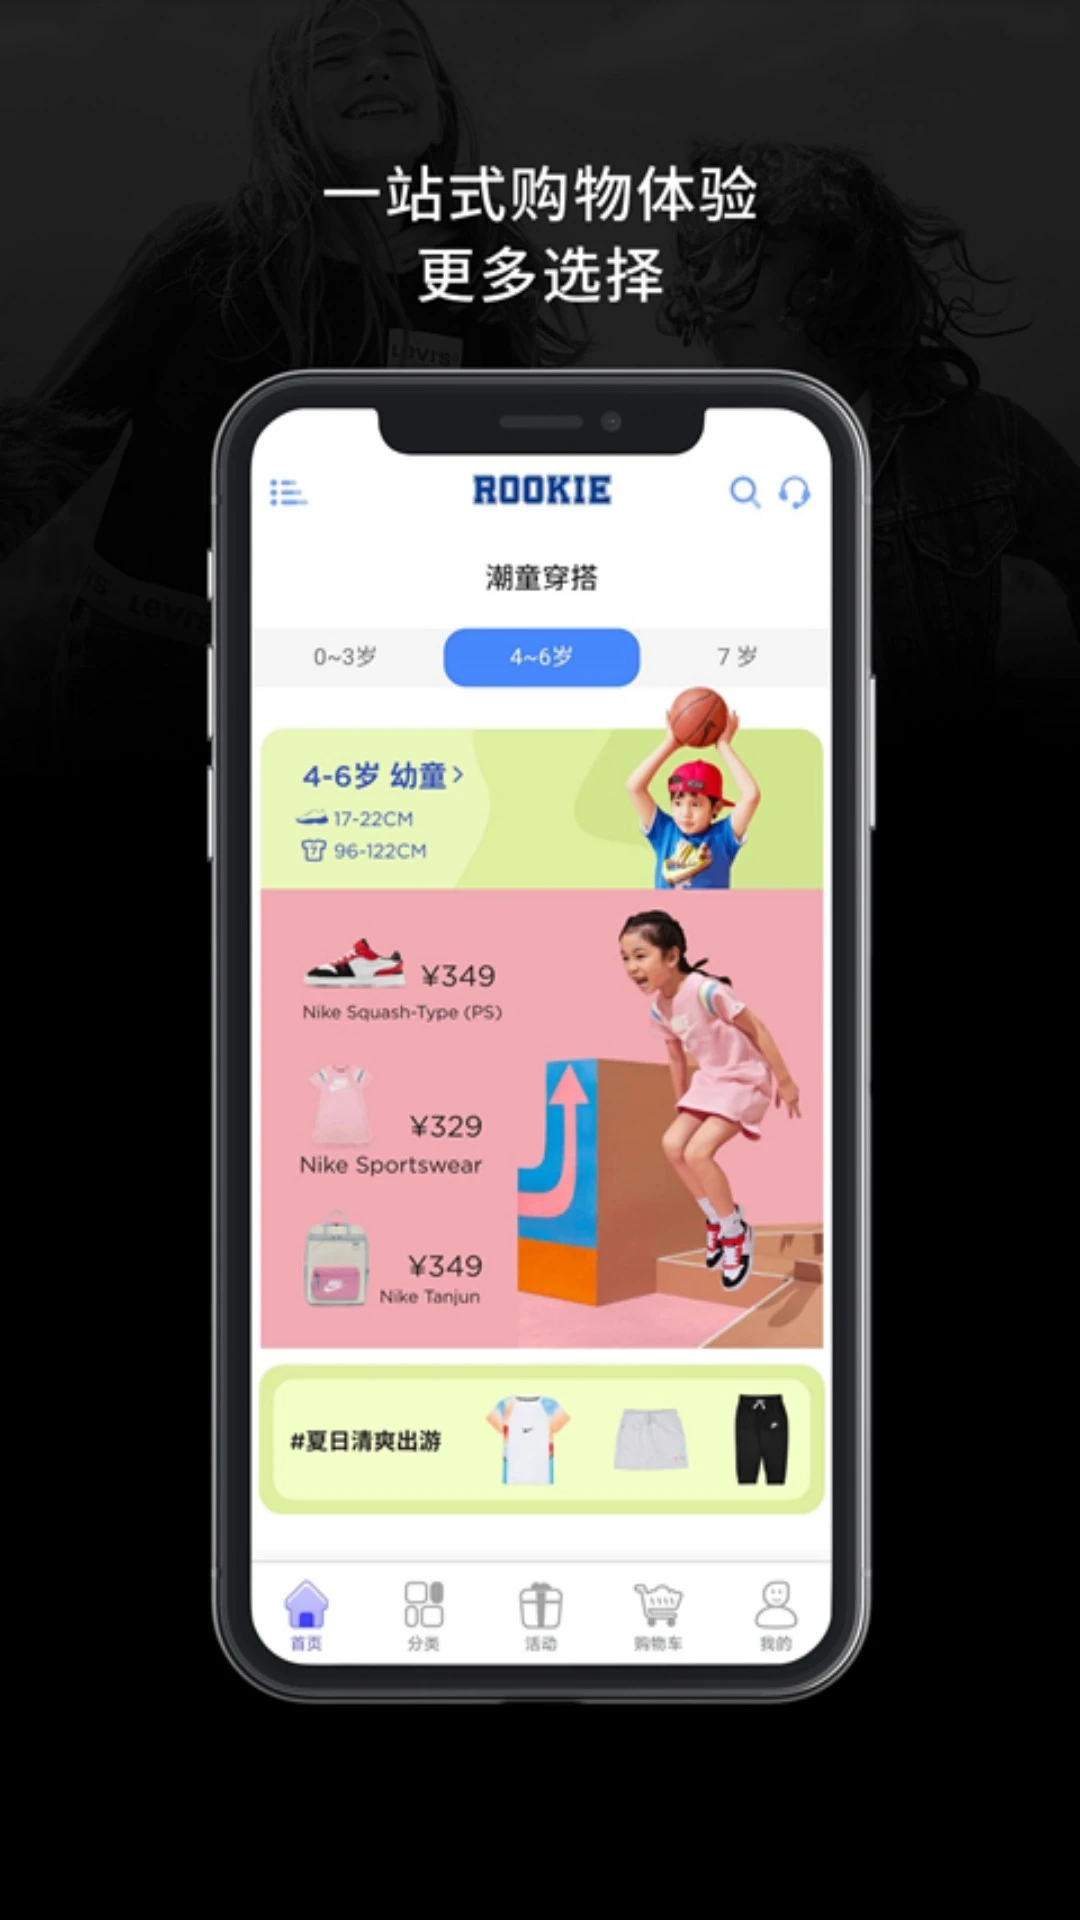 ROOKIEֻappv1.0.87 ׿